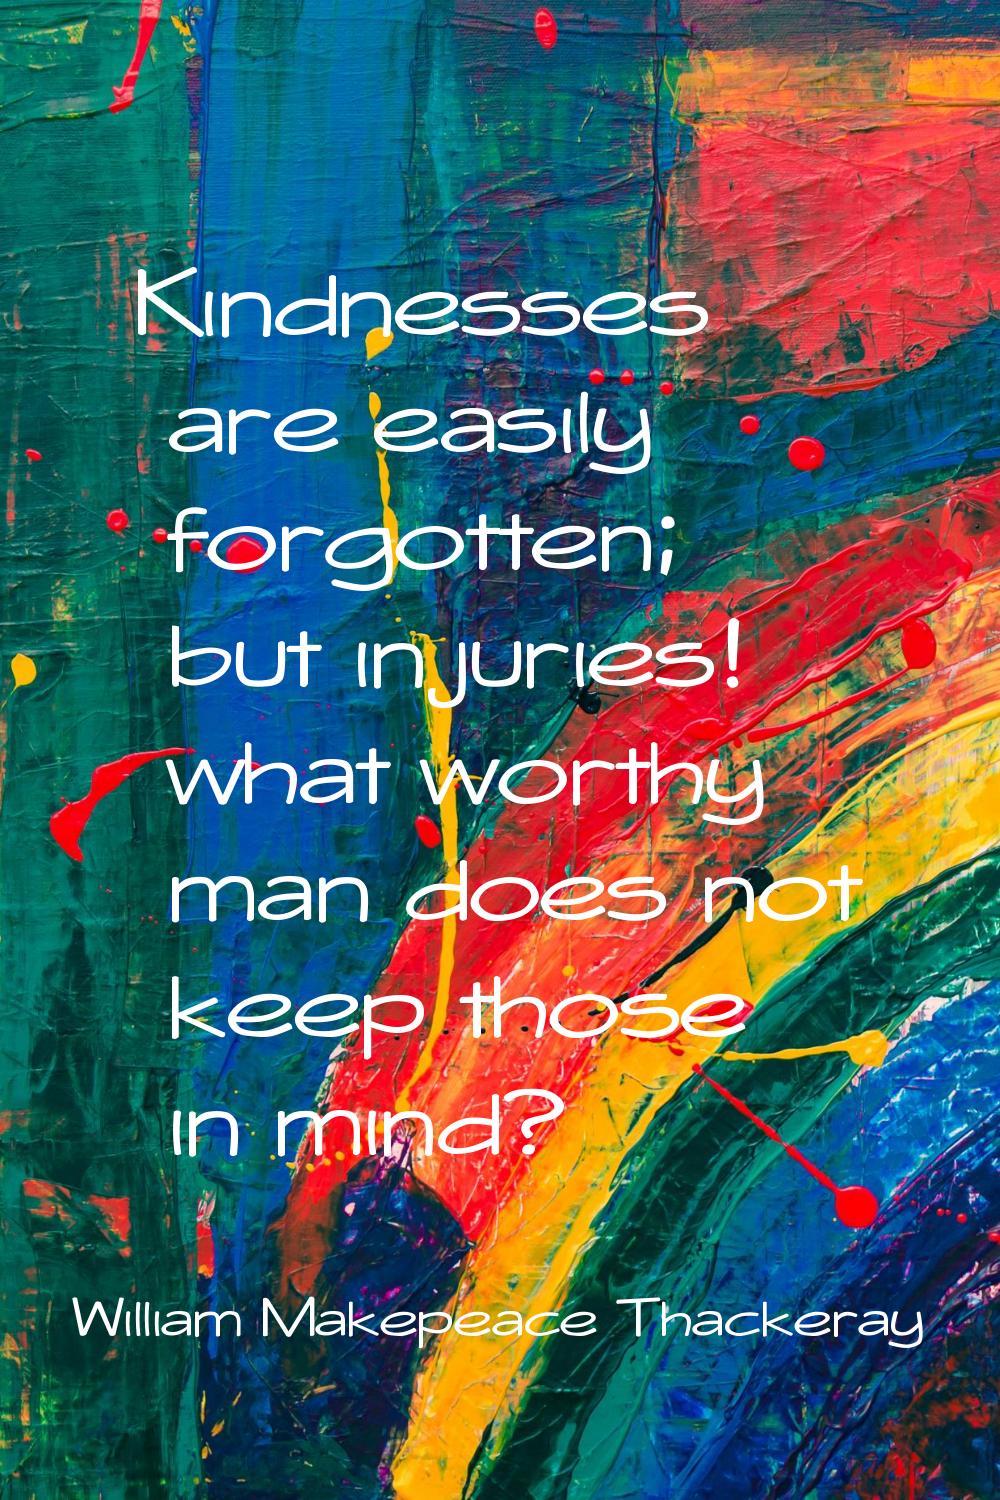 Kindnesses are easily forgotten; but injuries! what worthy man does not keep those in mind?